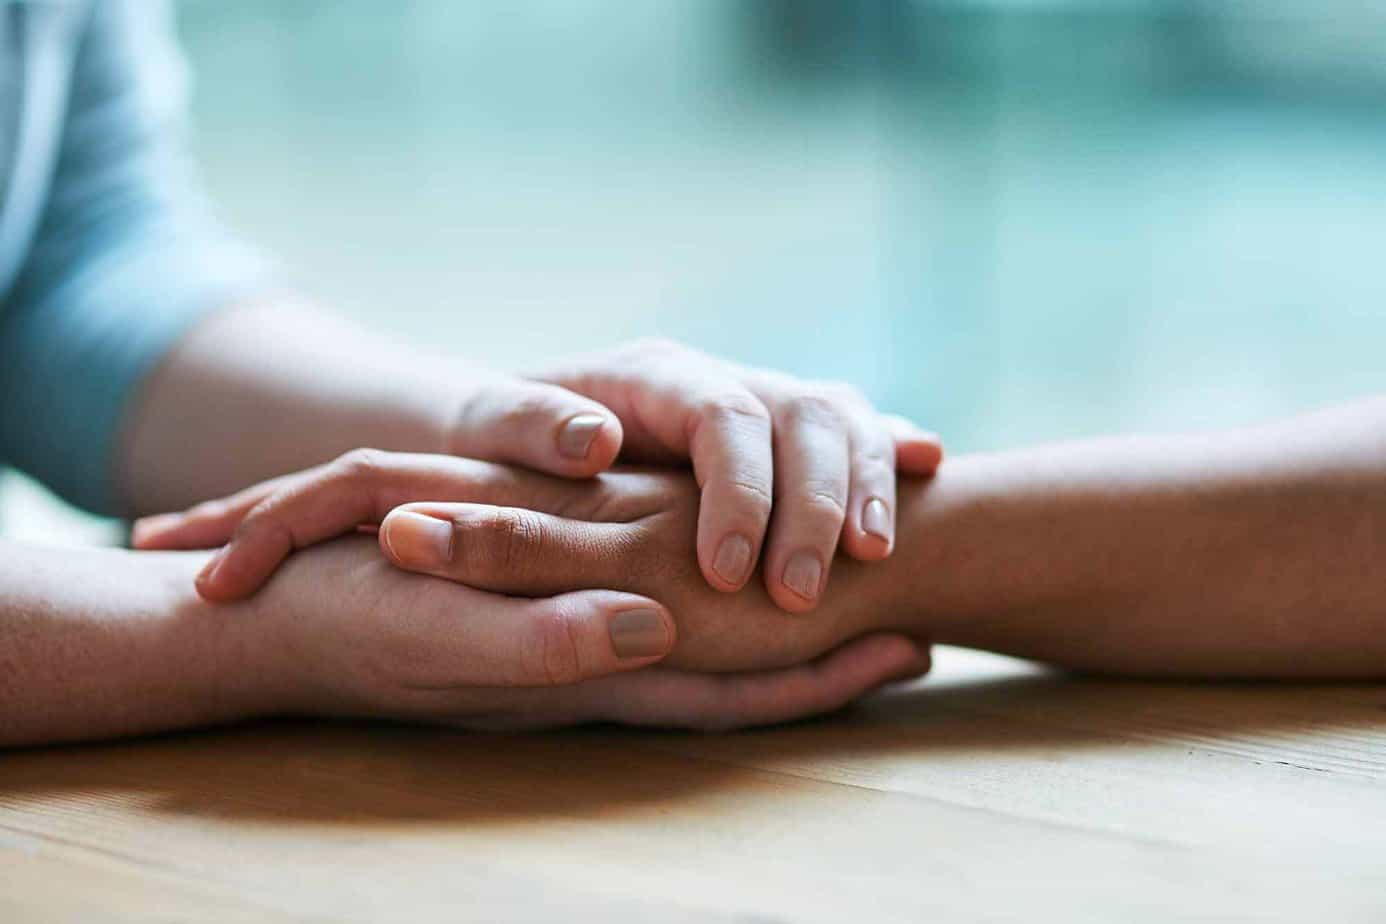 couple holding hands over a table